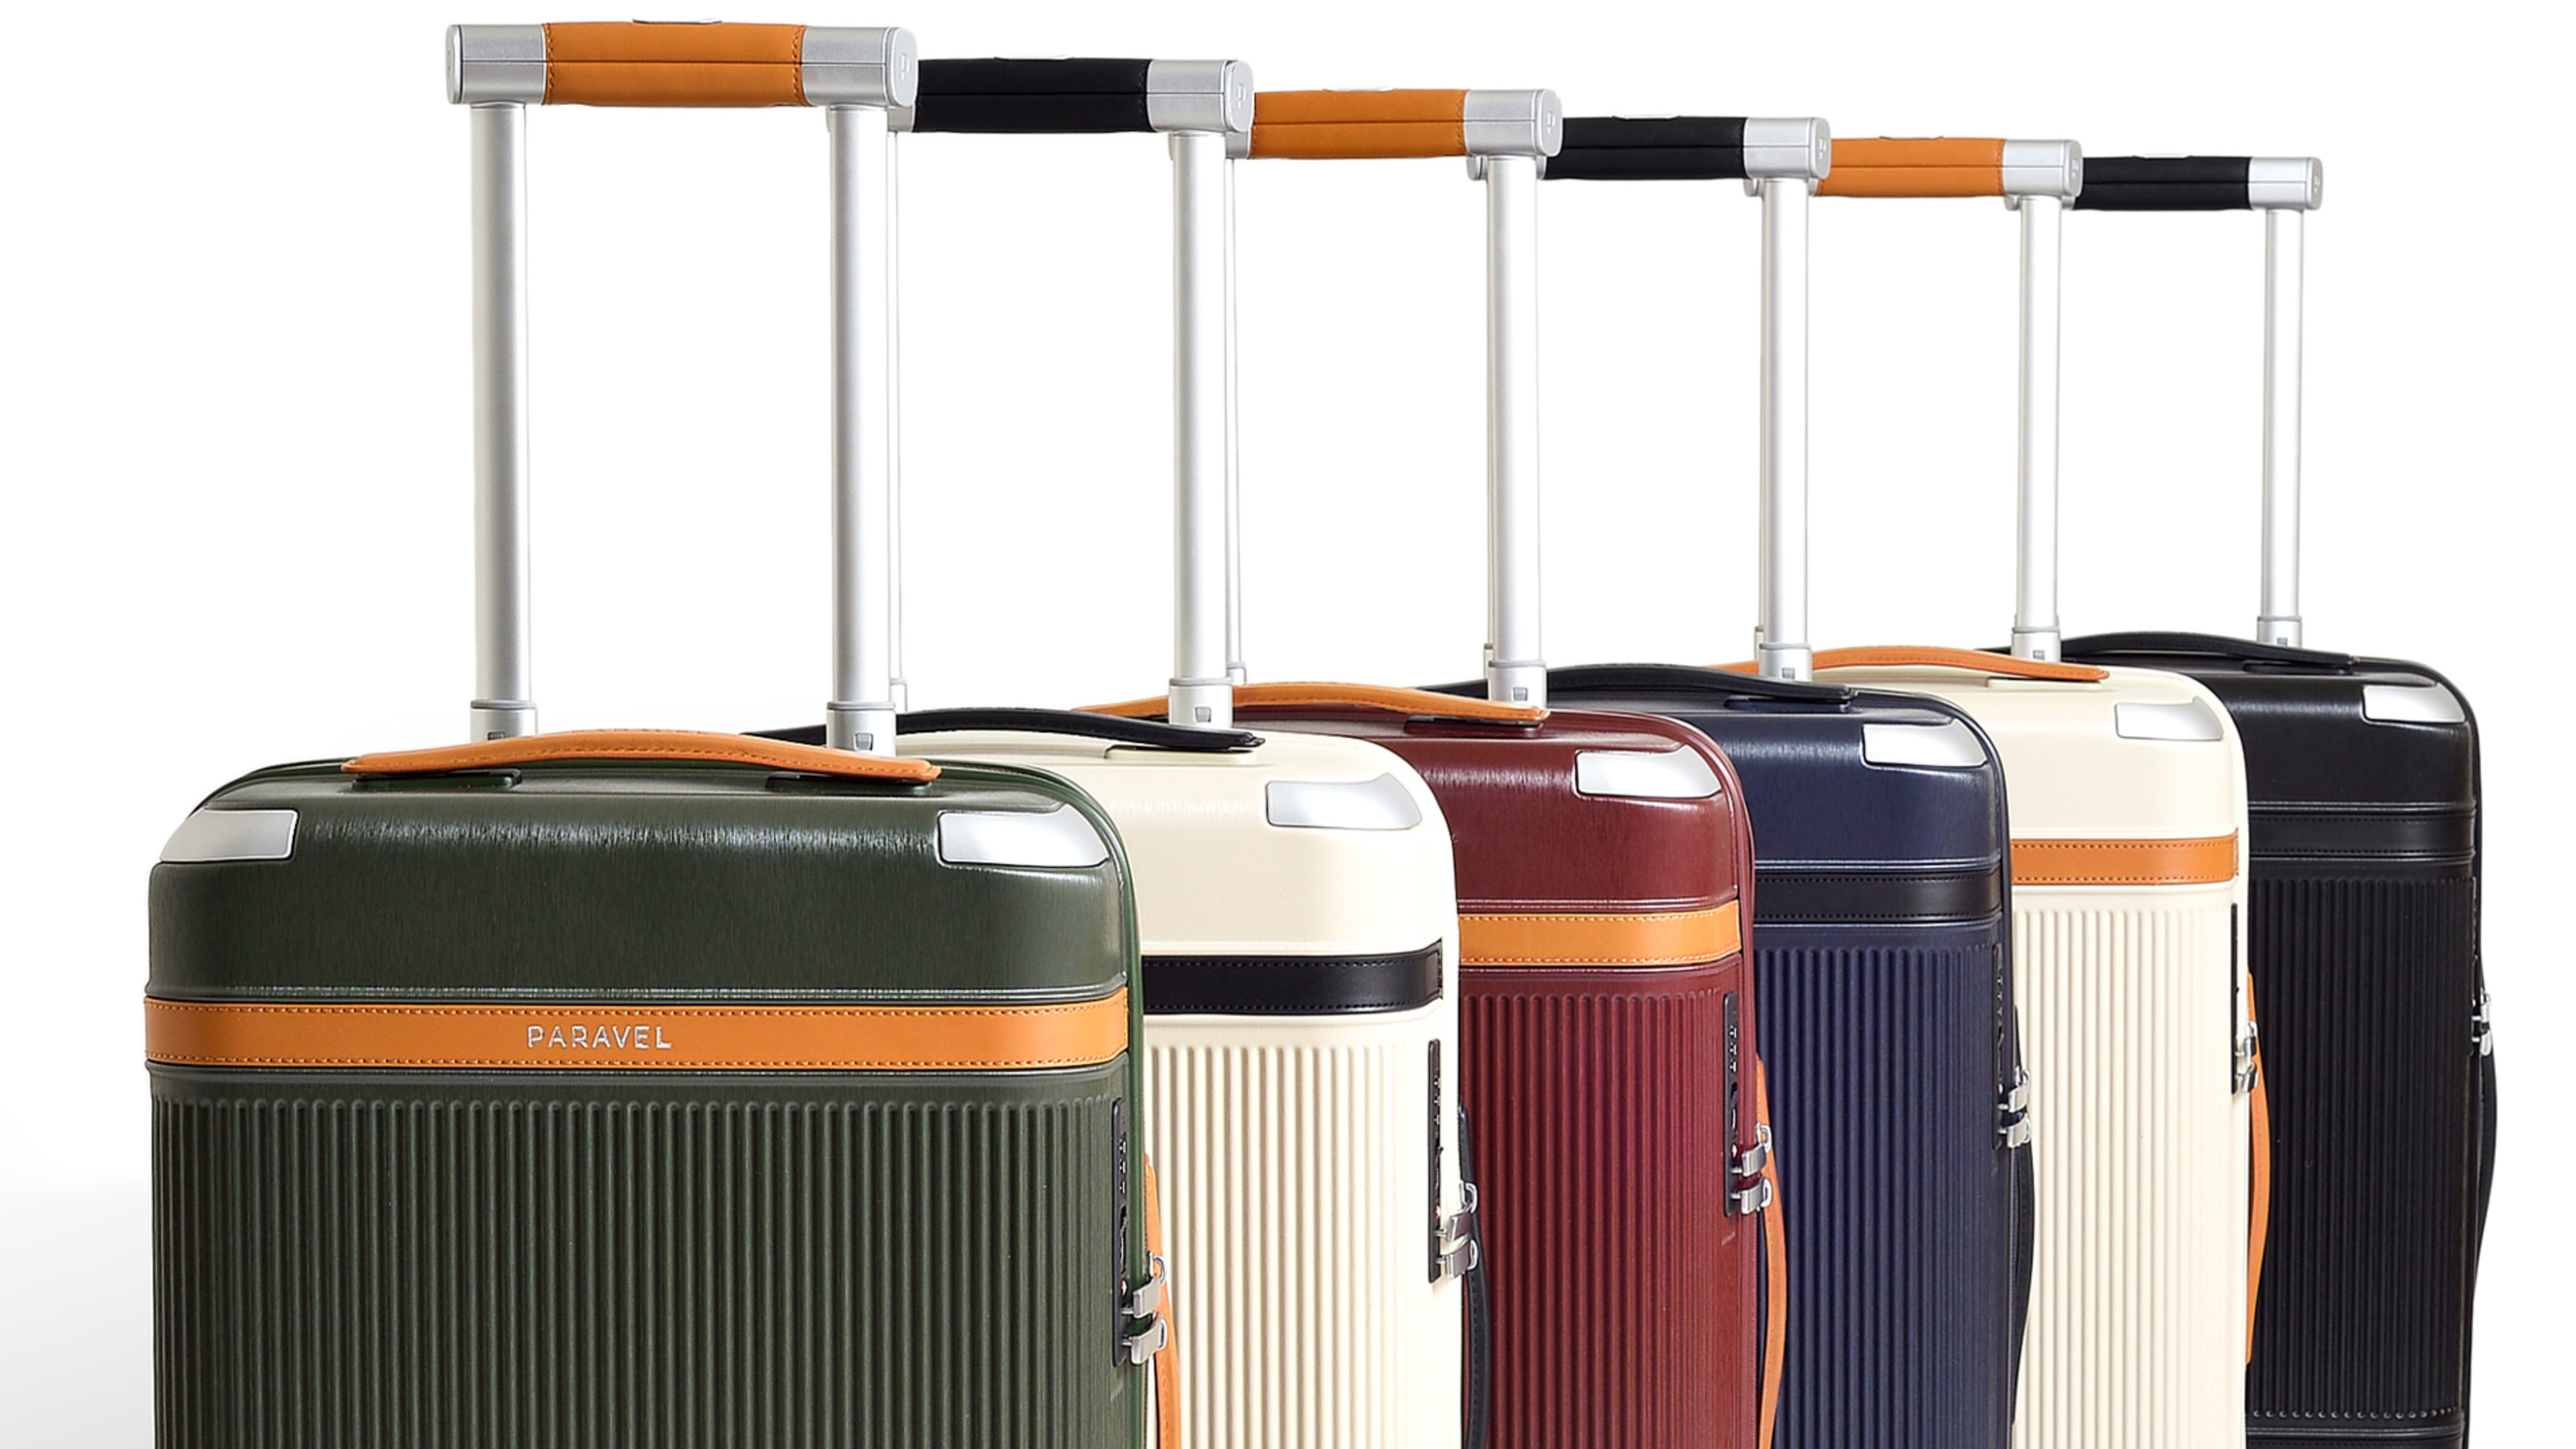 Your discarded water bottles are being magically transformed into this luggage